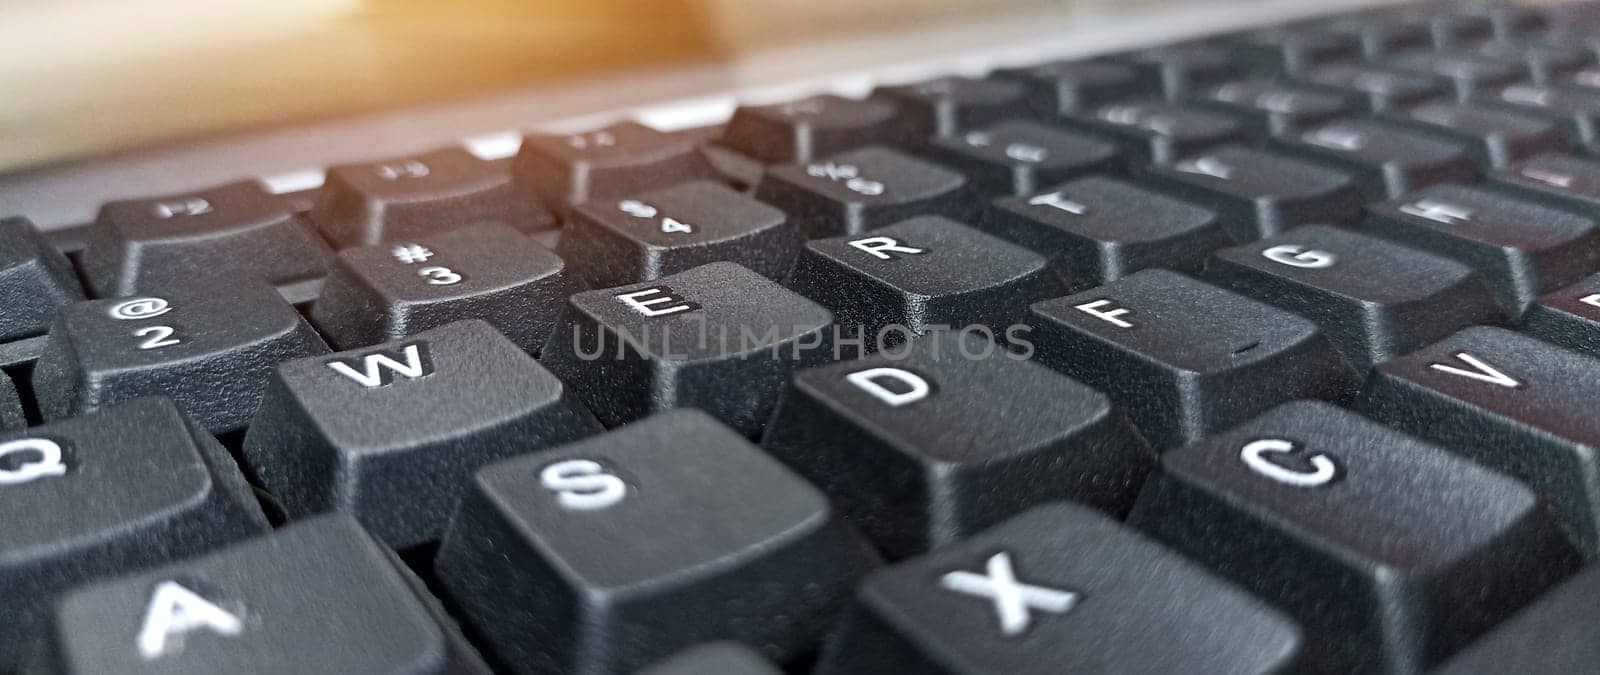 Close-up side view of black keyboard by boonruen